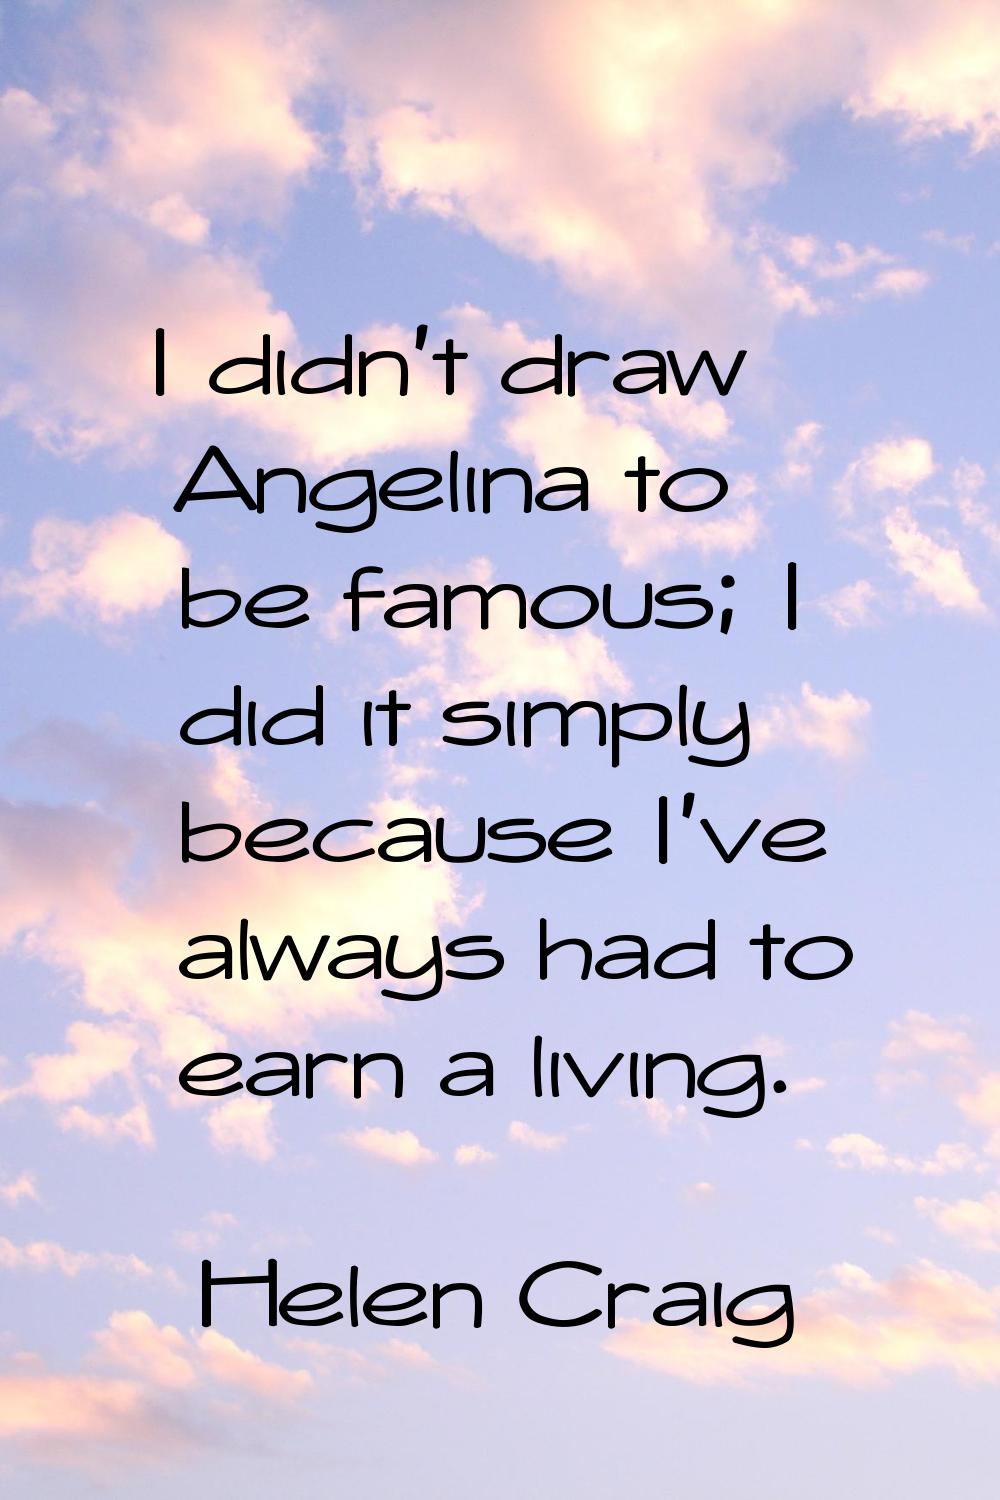 I didn't draw Angelina to be famous; I did it simply because I've always had to earn a living.